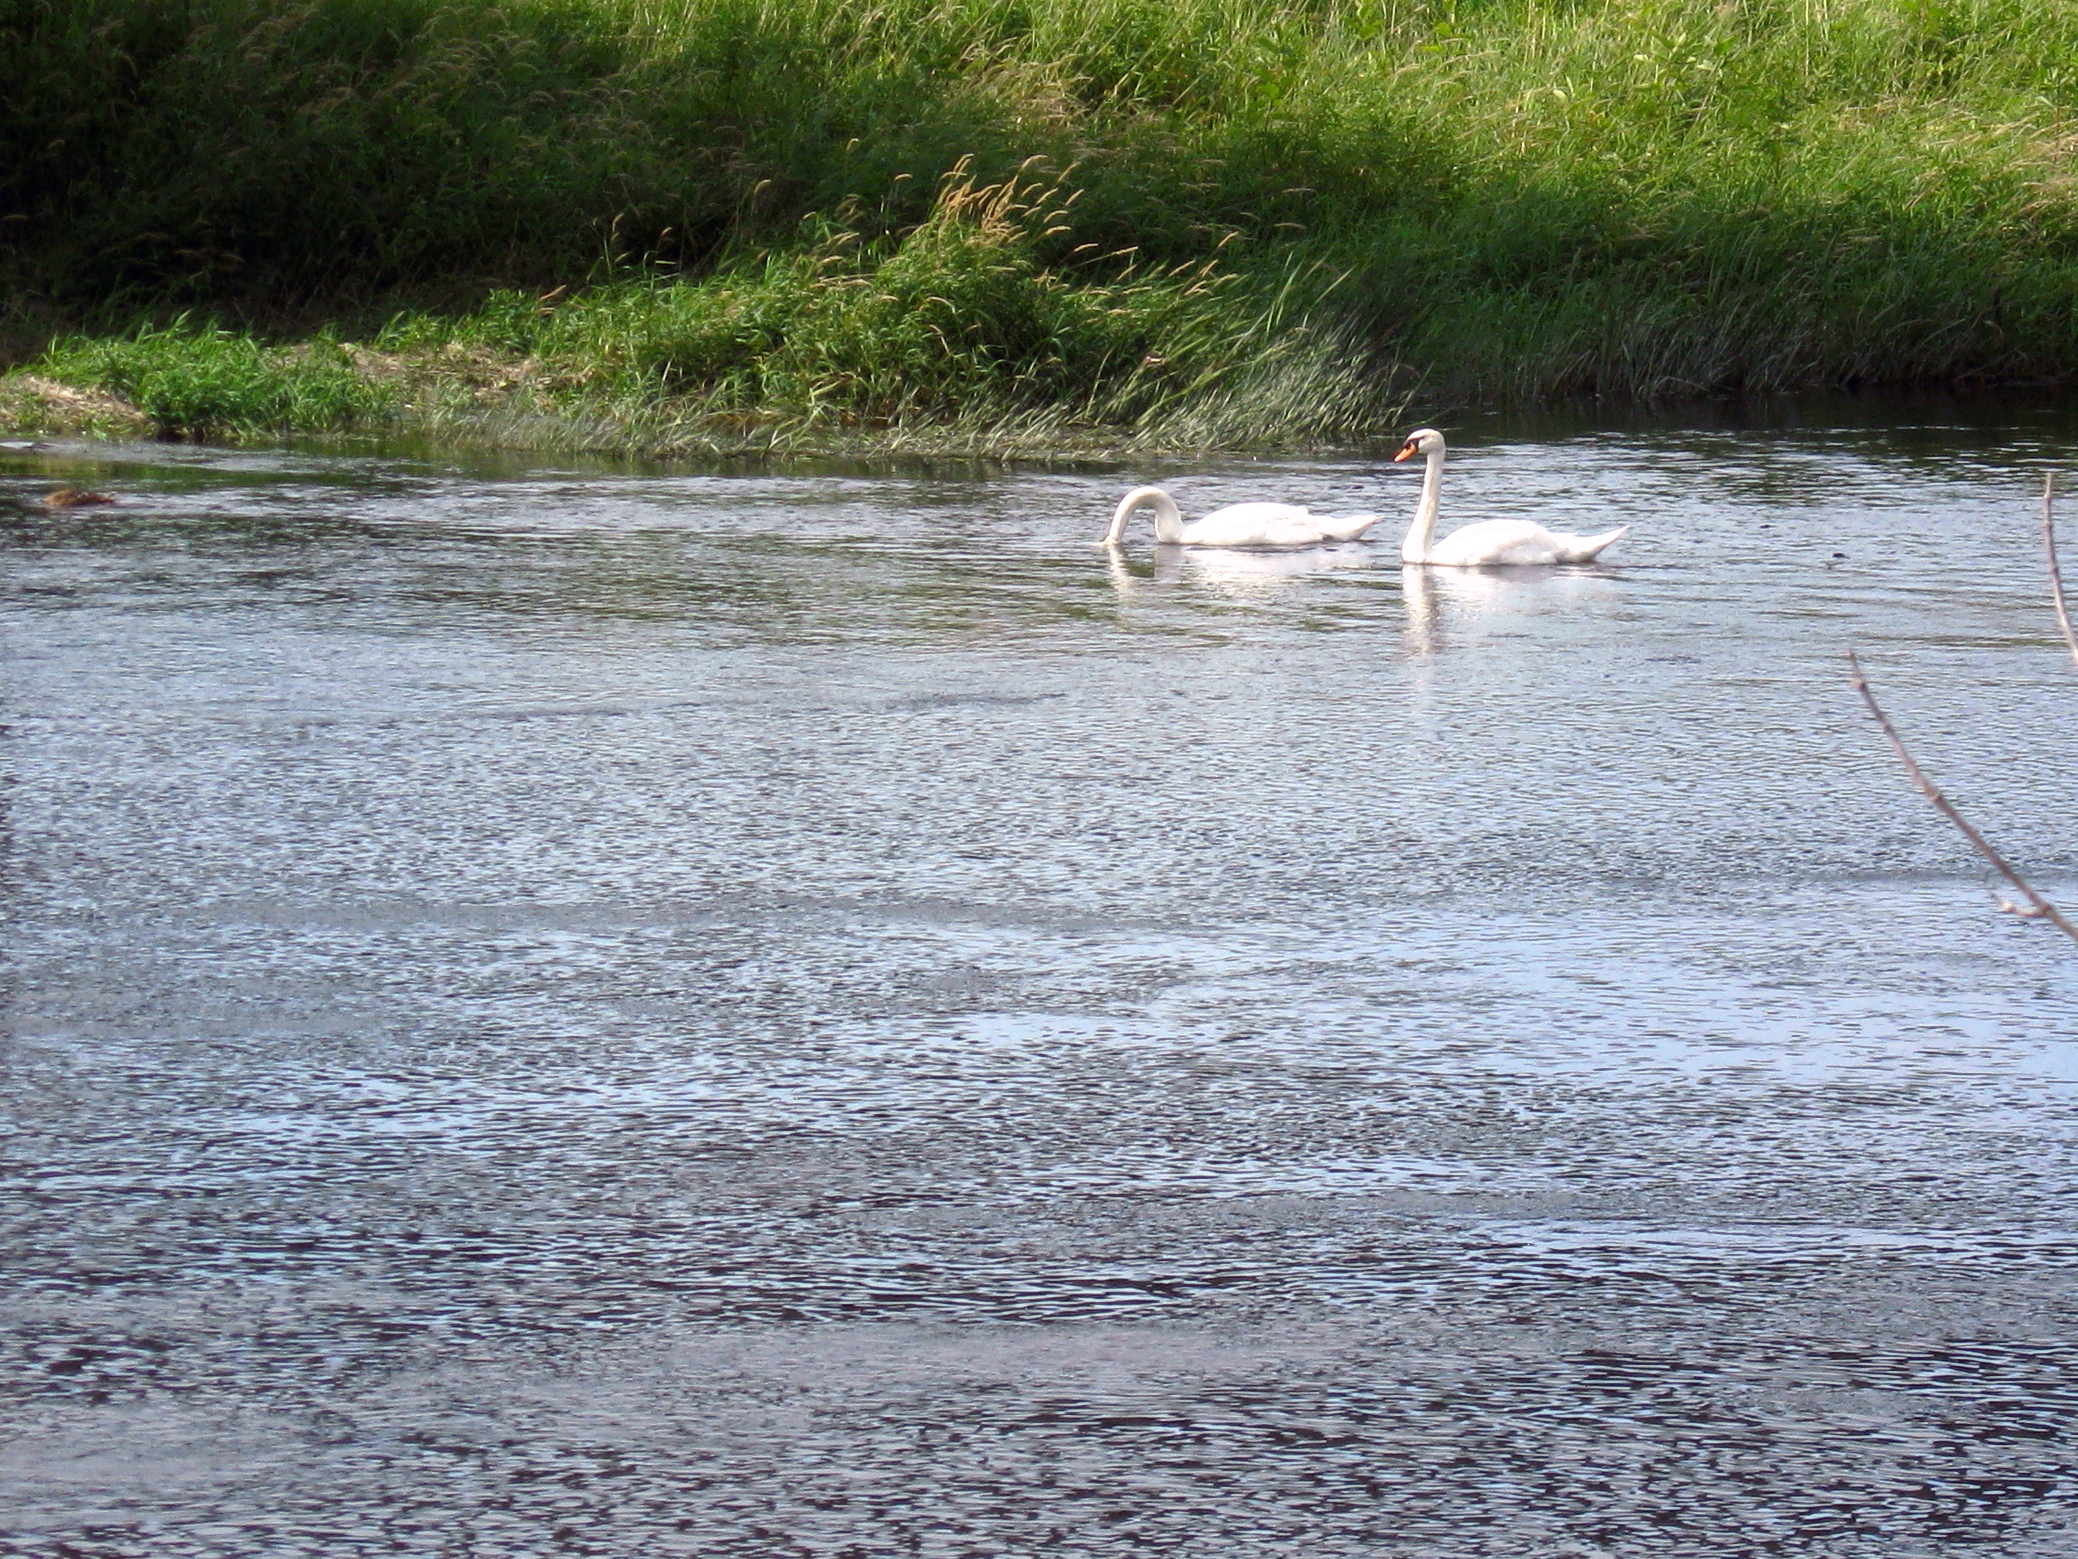 A pair of Royal swans swim along the far, green shore of the Rideau River.